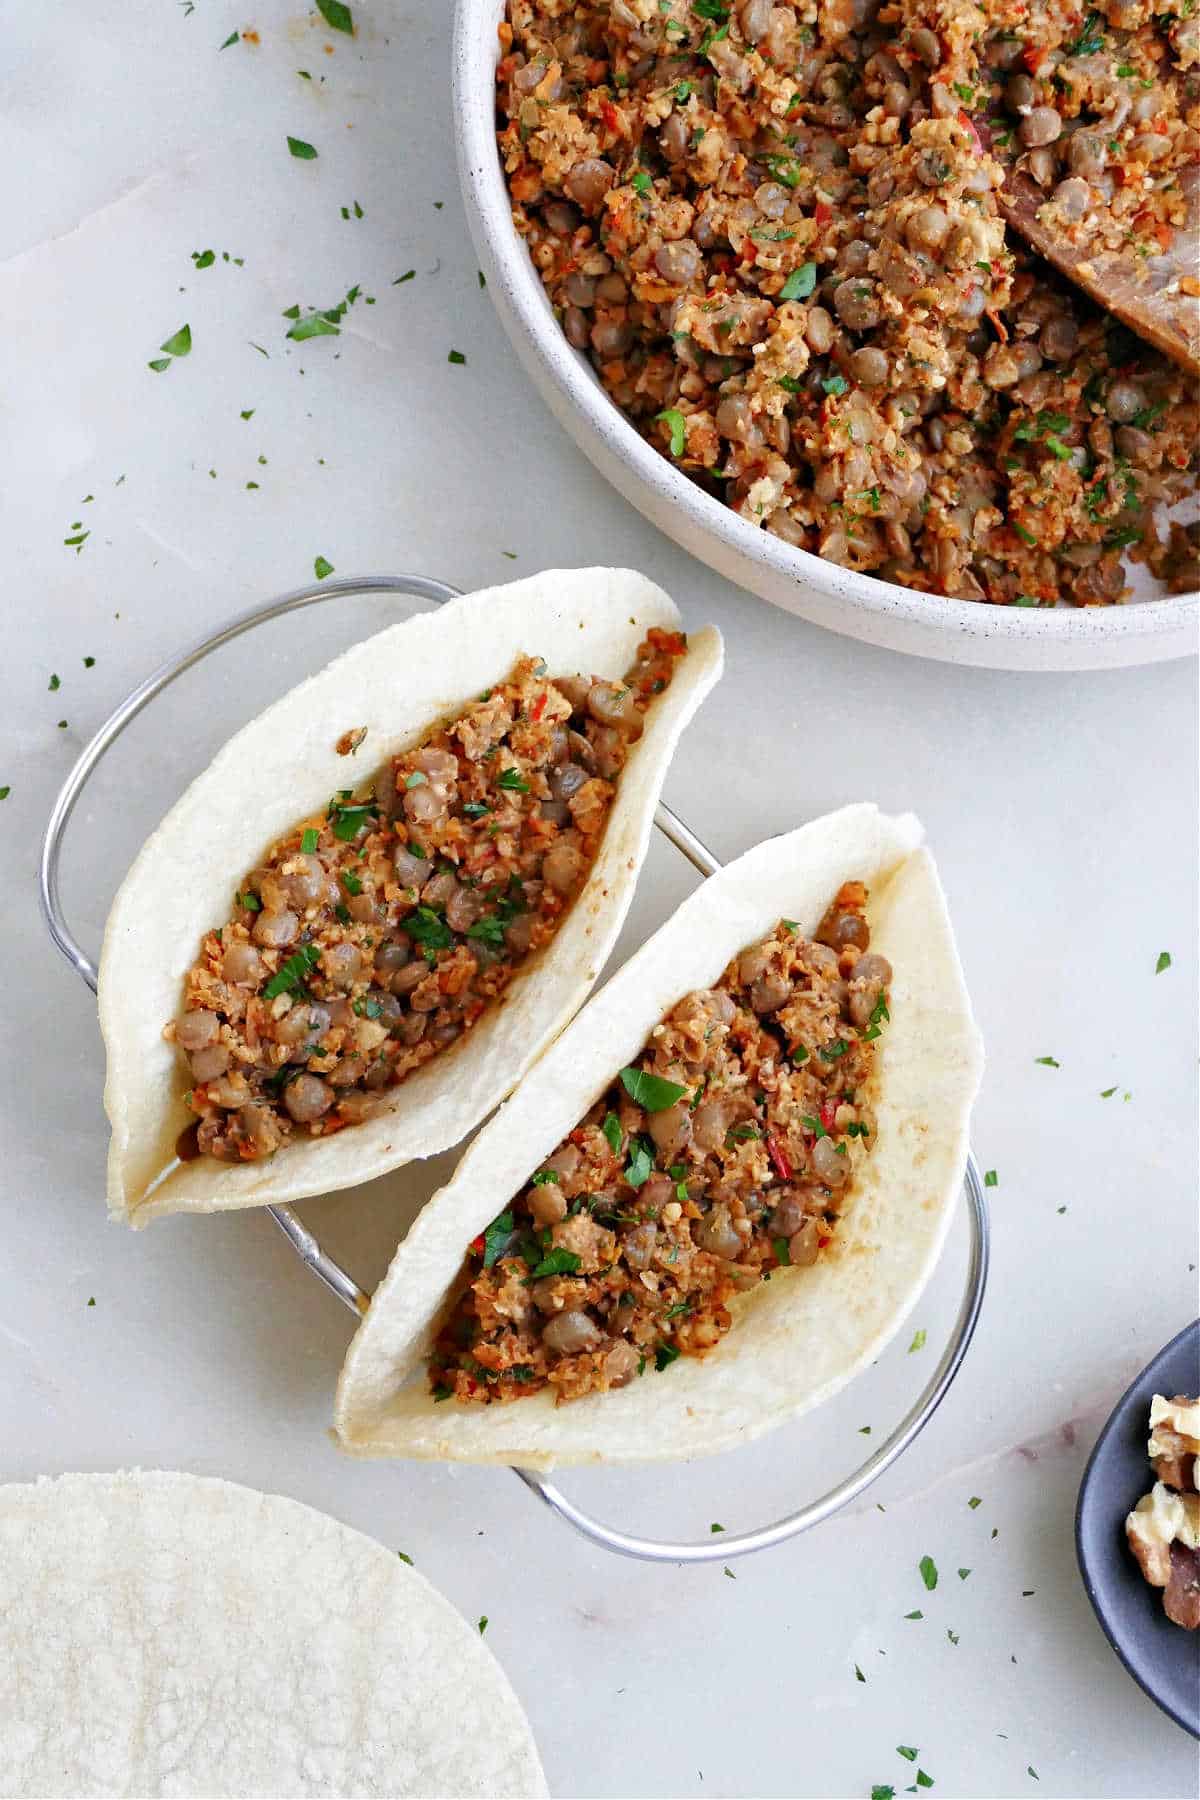 two corn tortillas filled with lentil walnut taco meat in a taco holder